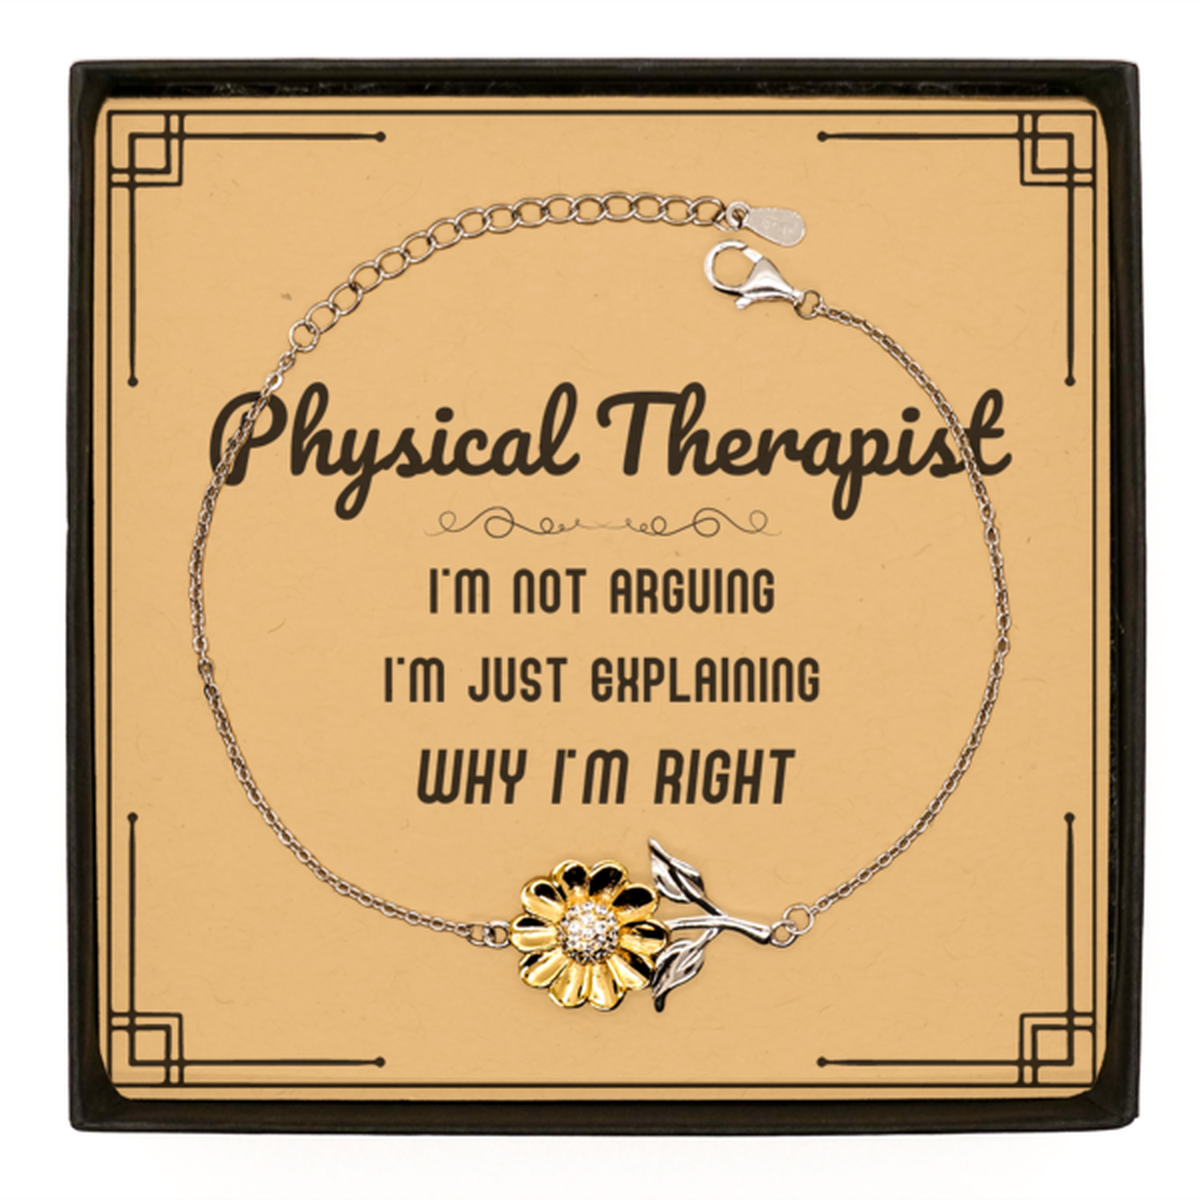 Physical Therapist I'm not Arguing. I'm Just Explaining Why I'm RIGHT Sunflower Bracelet, Funny Saying Quote Physical Therapist Gifts For Physical Therapist Message Card Graduation Birthday Christmas Gifts for Men Women Coworker